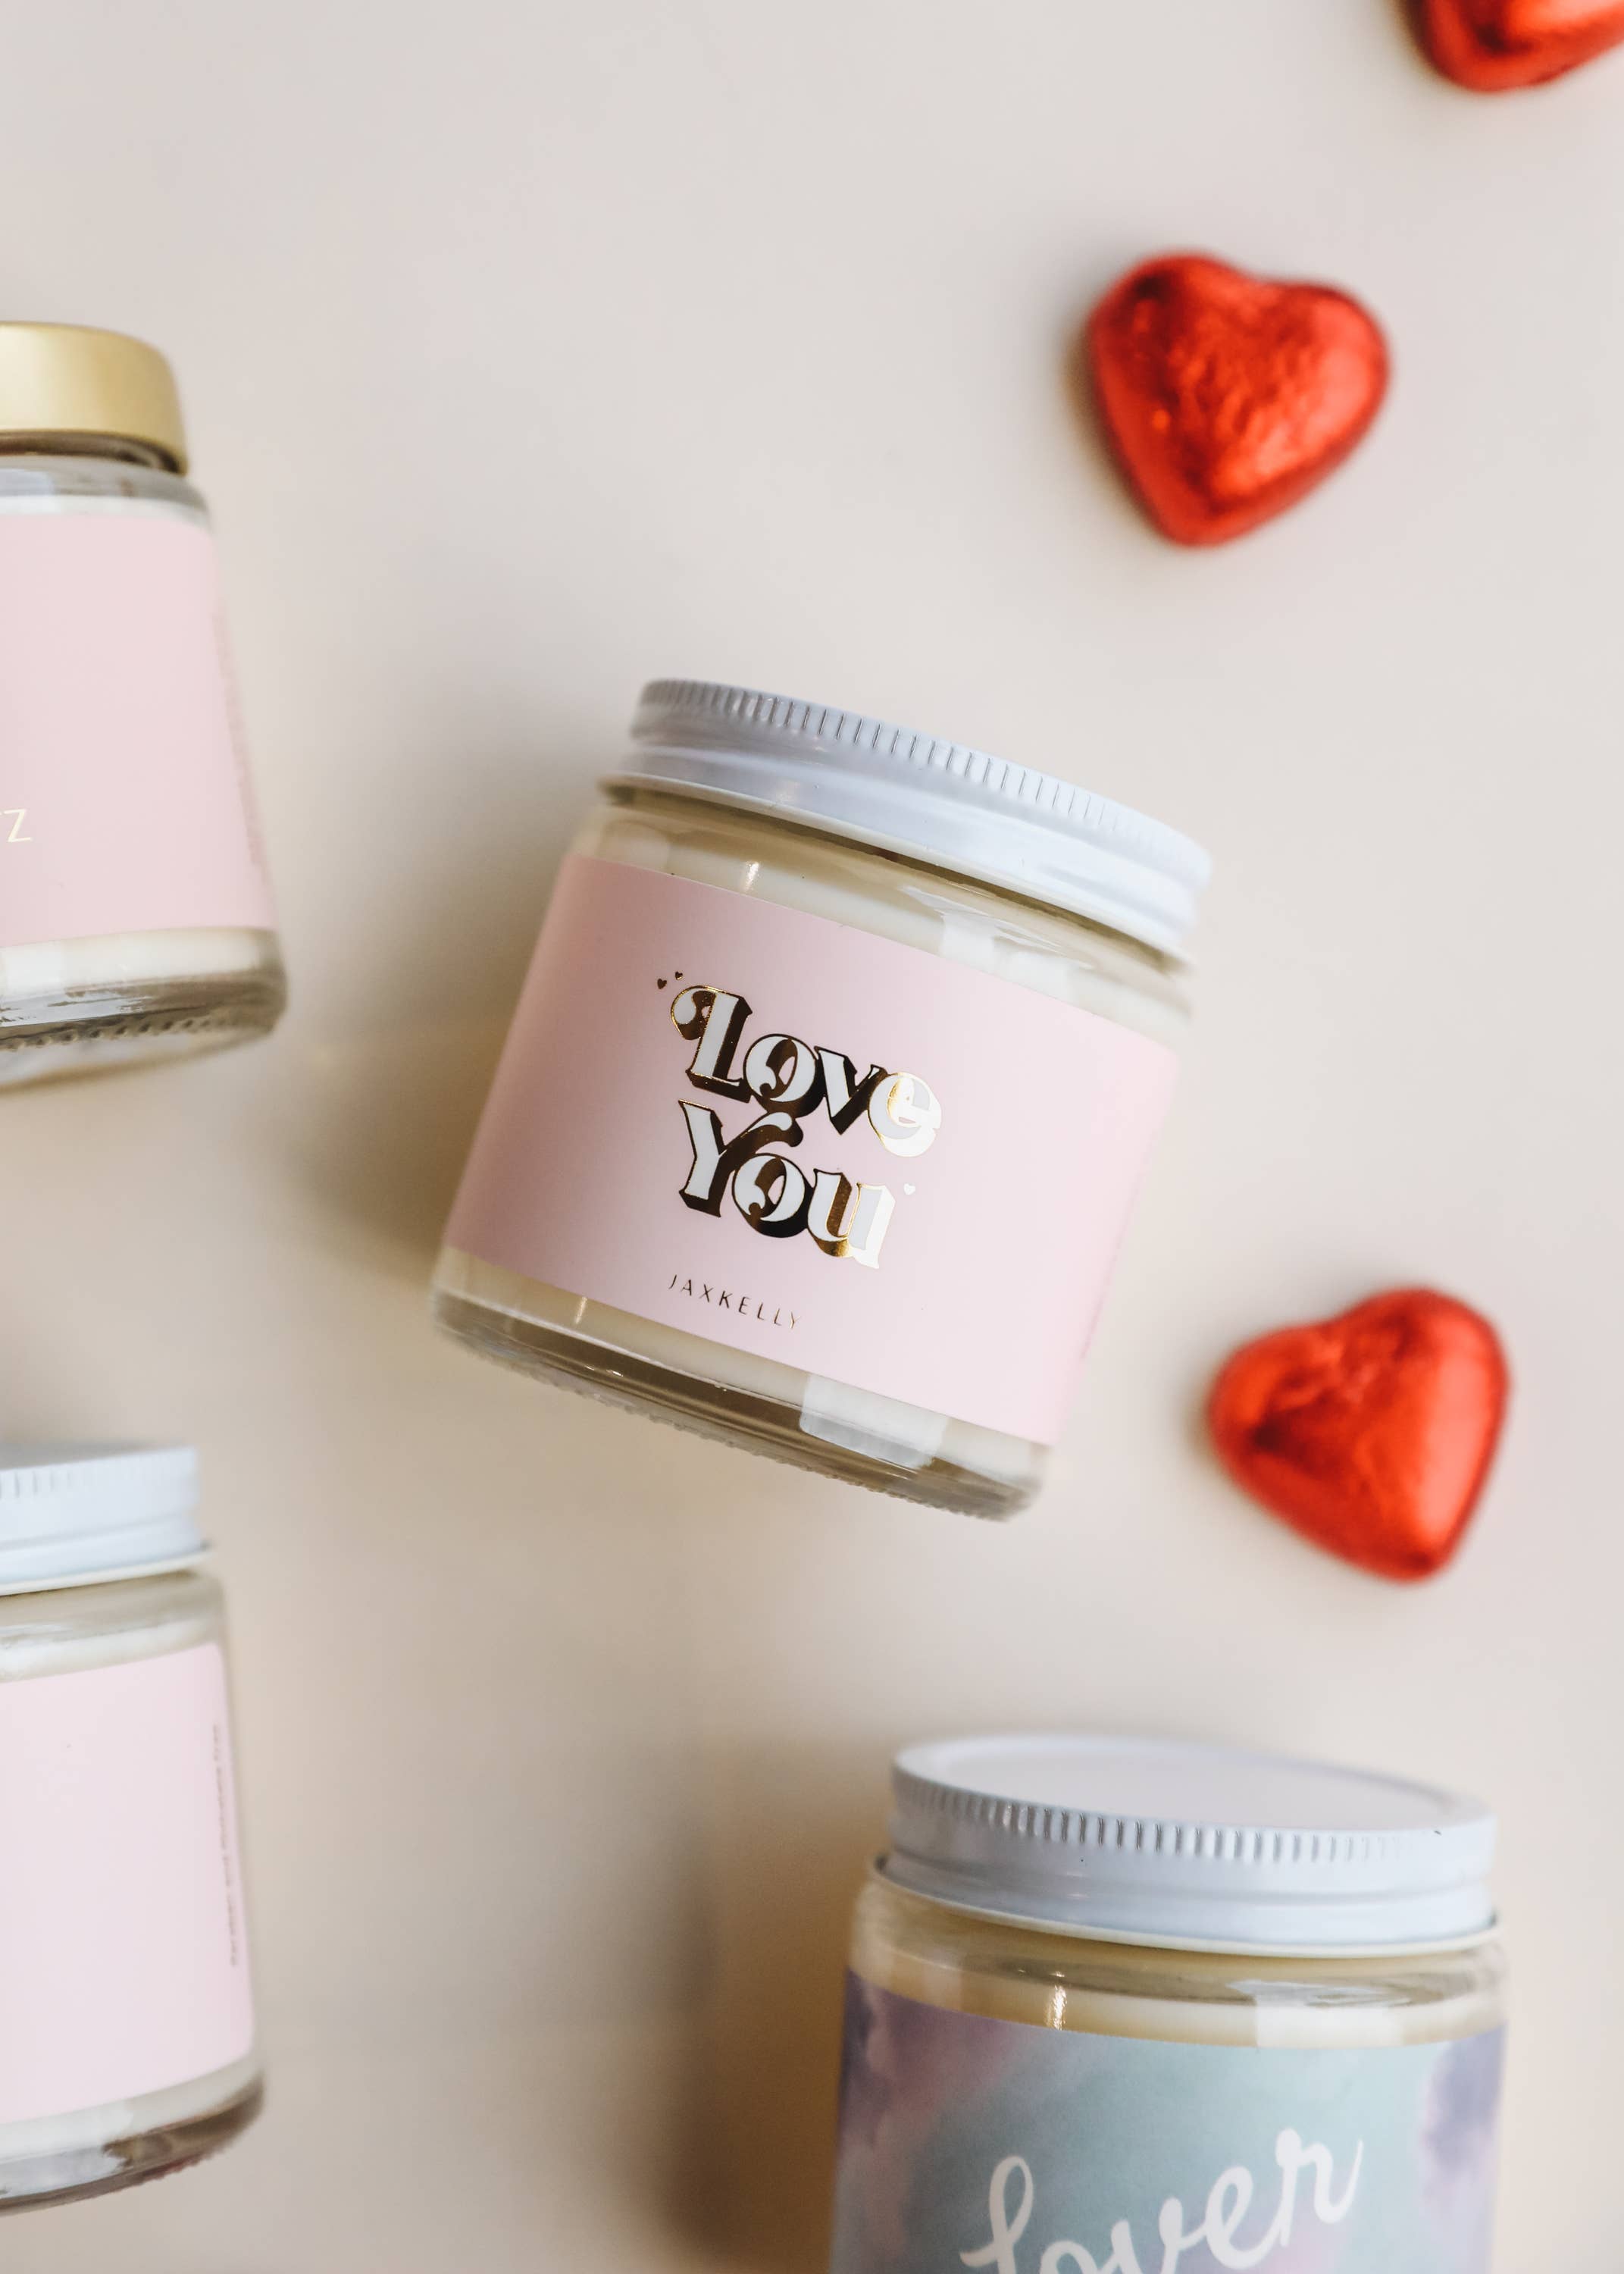 JaxKelly - 4oz - Love You Candle